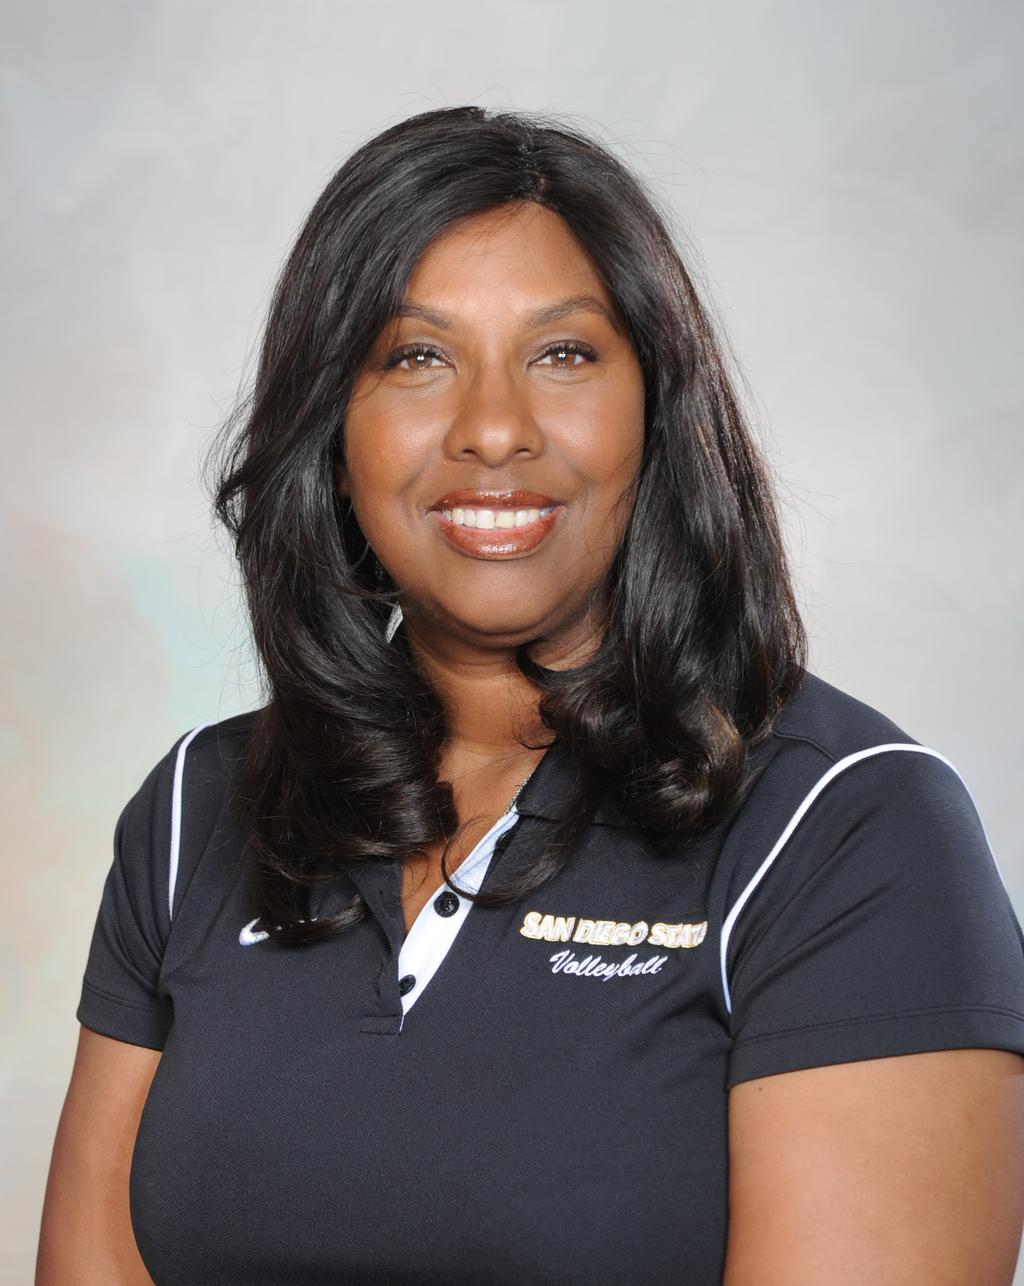 Deitre COLLINS-PARKER Head Coach - 11th season Deitre Collins-Parker, a two-time national collegiate player of the year and AVCA Hall of Fame member, was named the head volleyball coach at San Diego